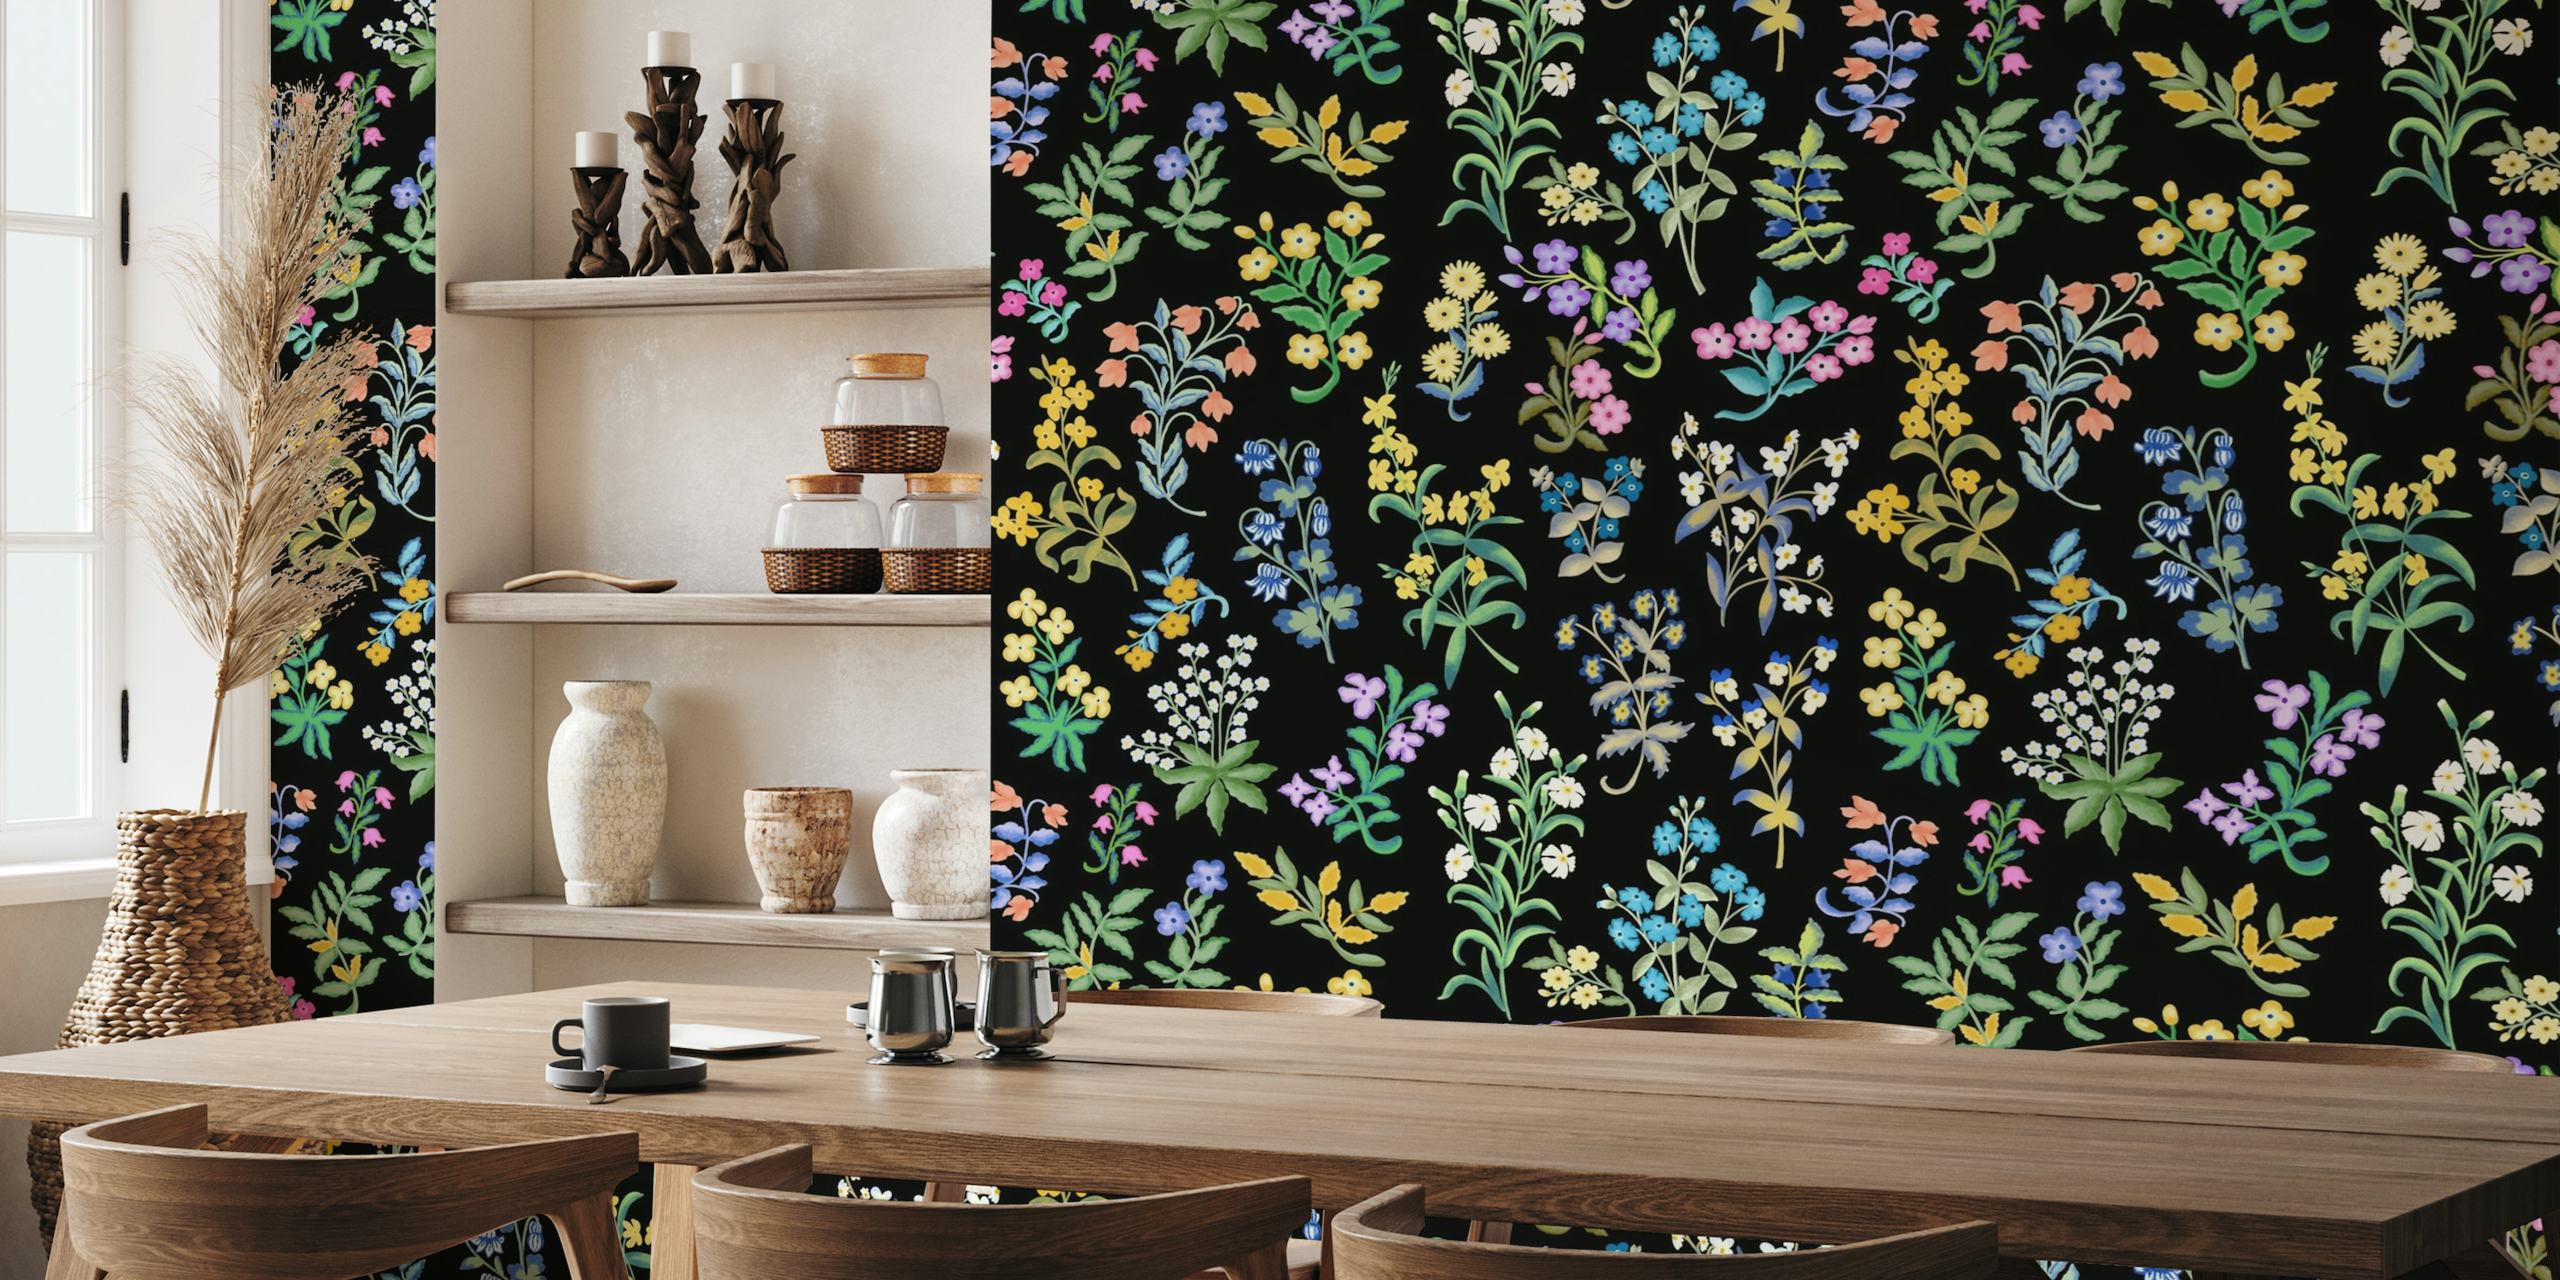 Millefleurs pattern wall mural with assorted colorful flowers on a black background